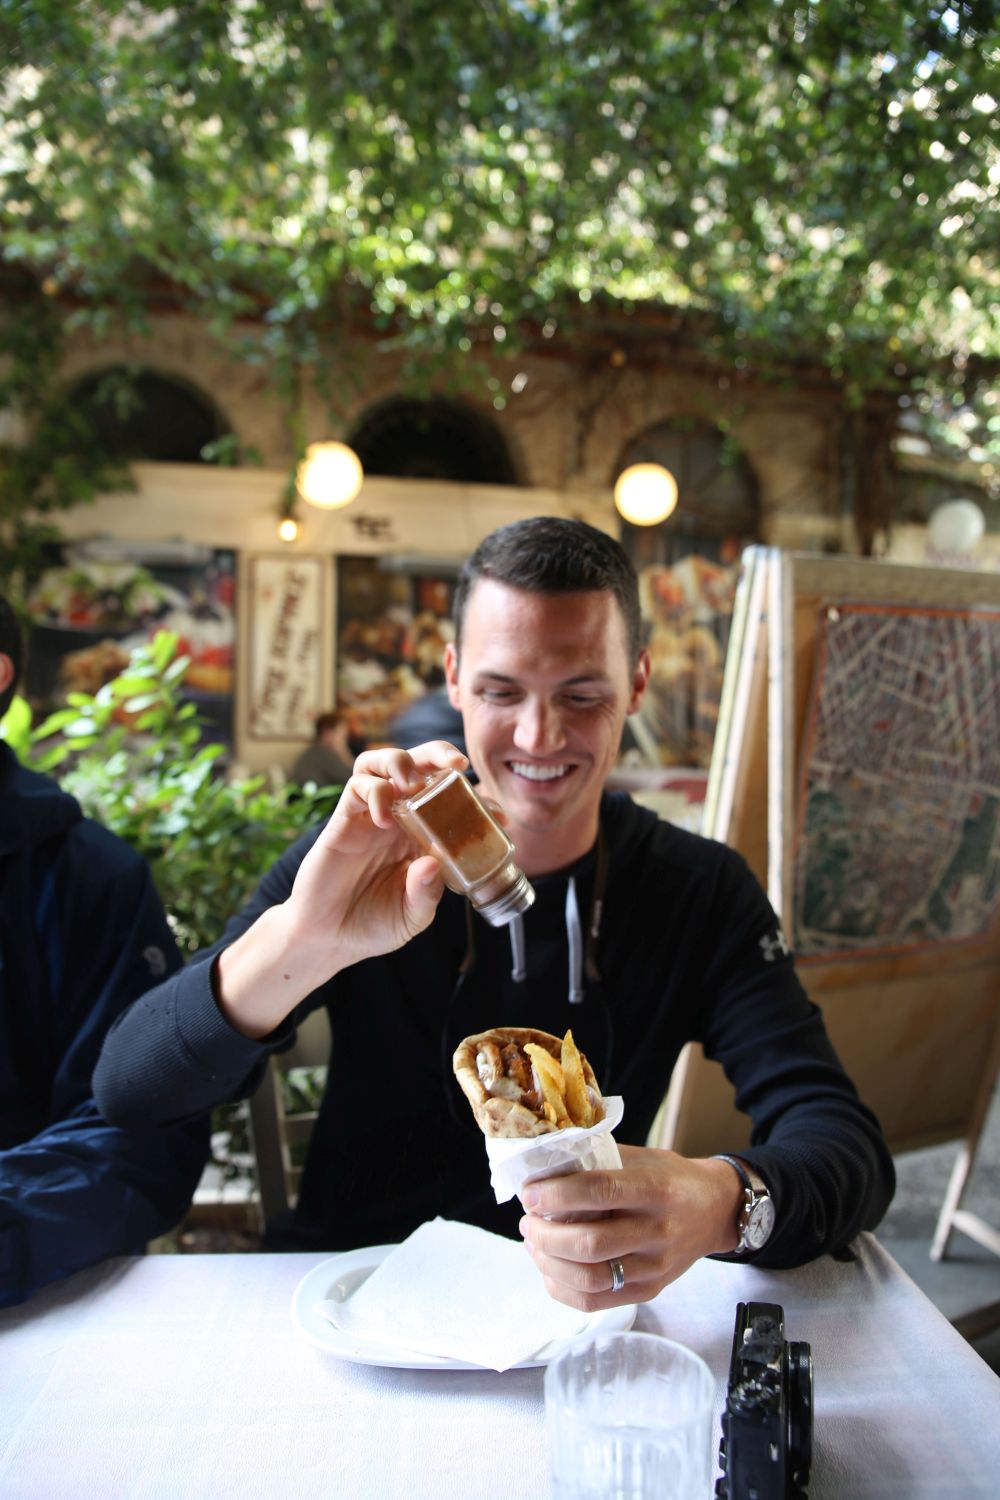 Athens food tour: Ready for the first bite of gyros!